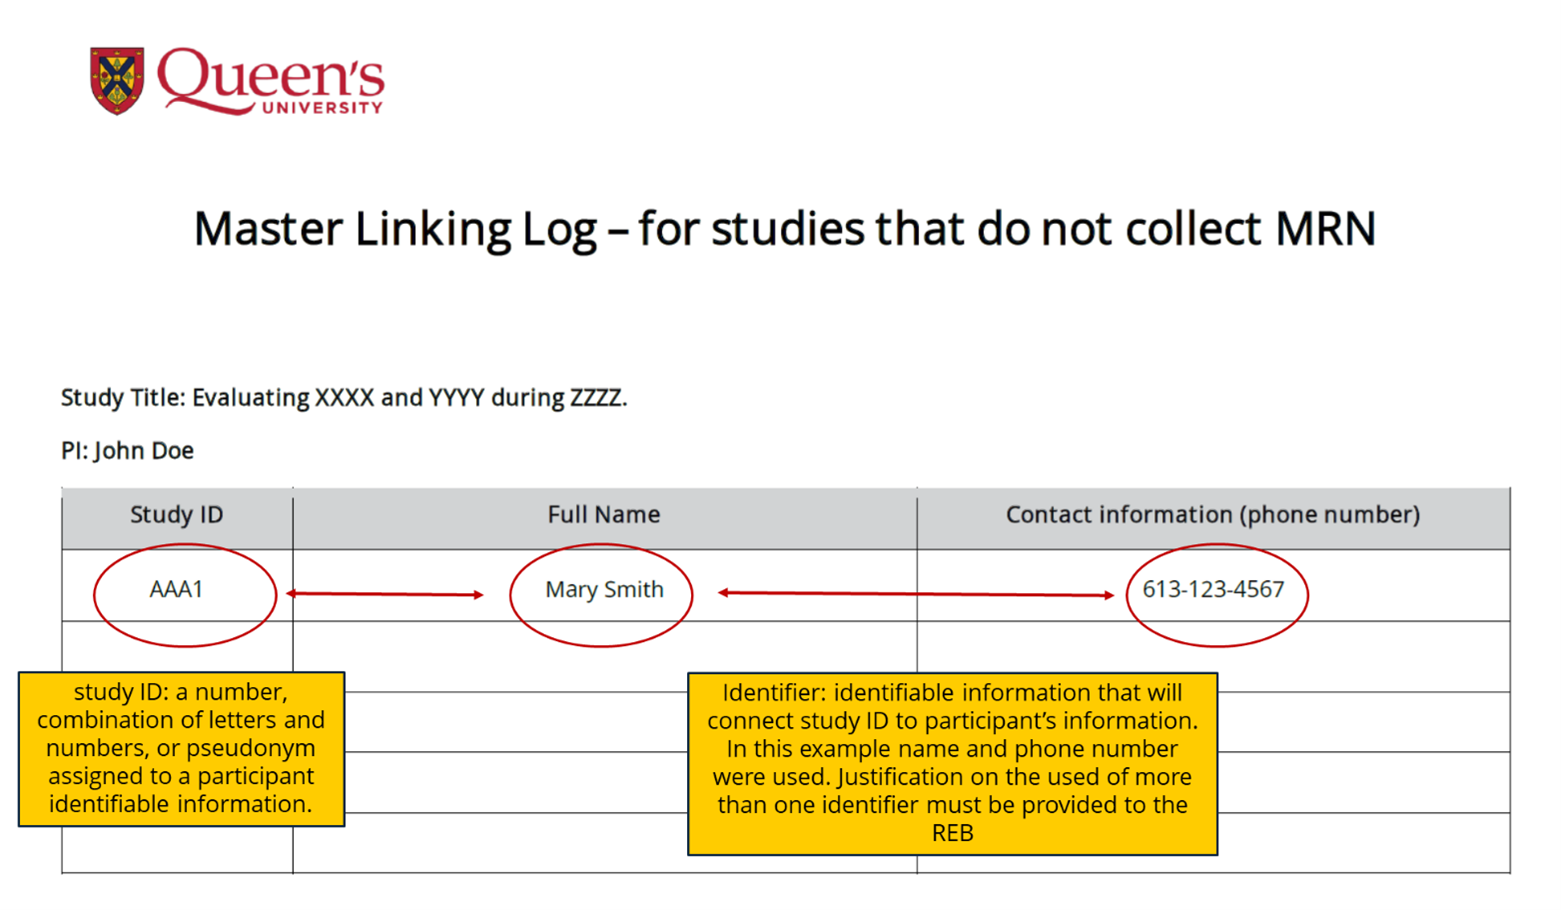 Example of Master Linking Log for studies that do not collect MRN.